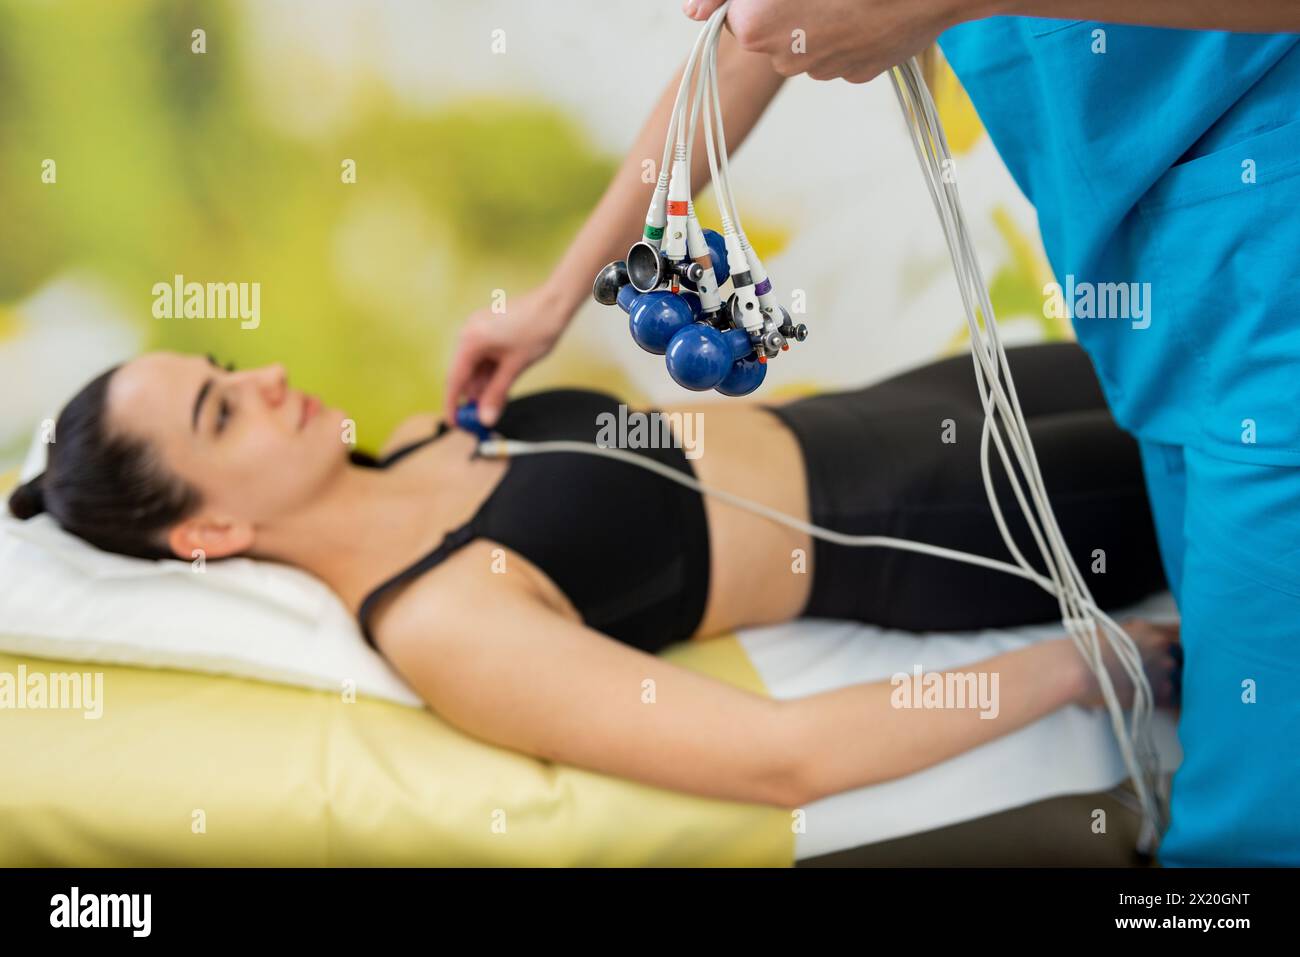 A patient relaxes while a medical professional carefully administers an ECG test. Stock Photo